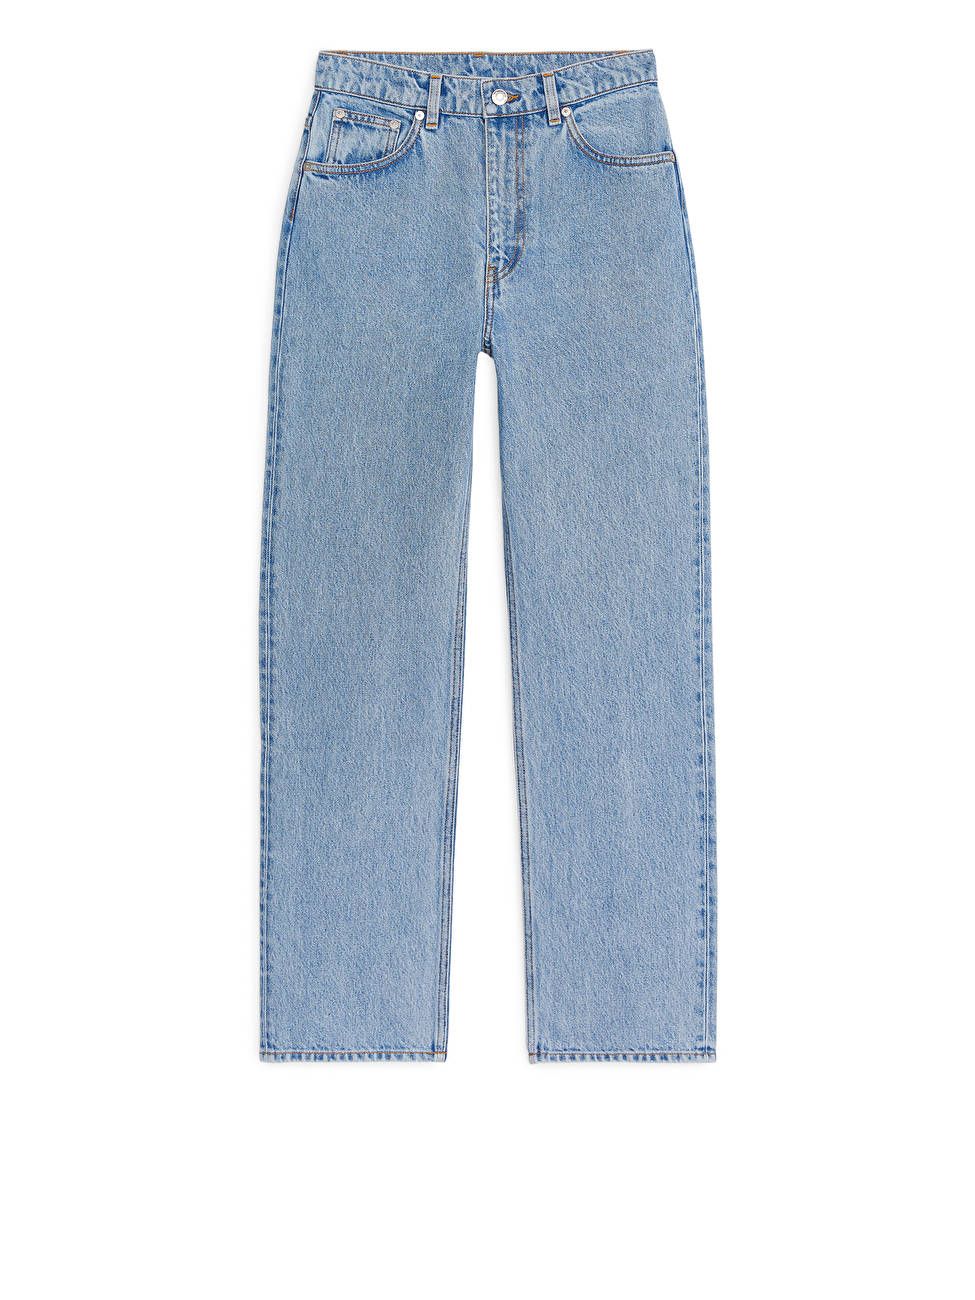 STRAIGHT CROPPED Jeans | ARKET (US&UK)